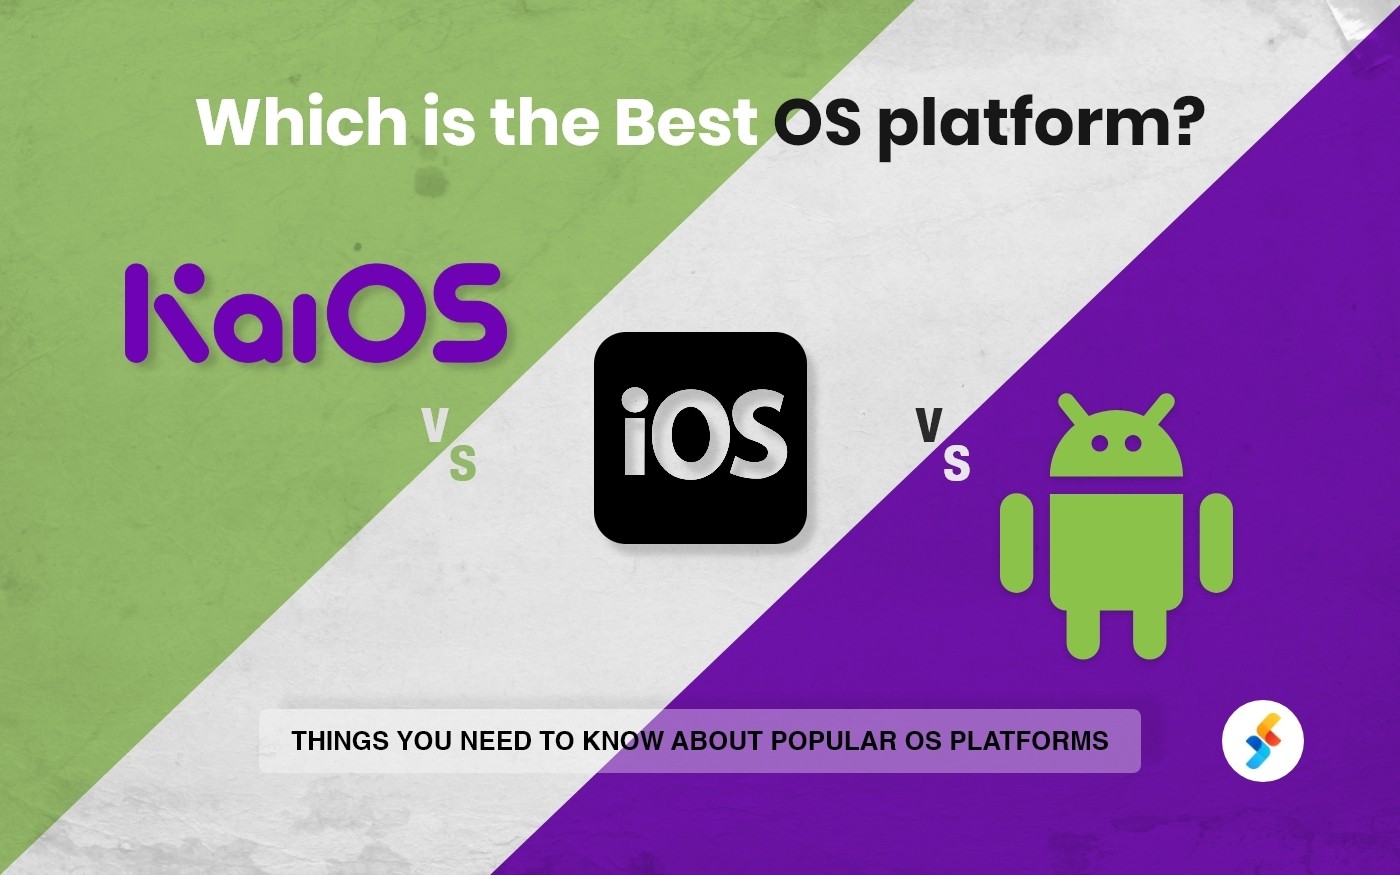 iOS, Android, or KaiOS: Which is the Best OS platform?